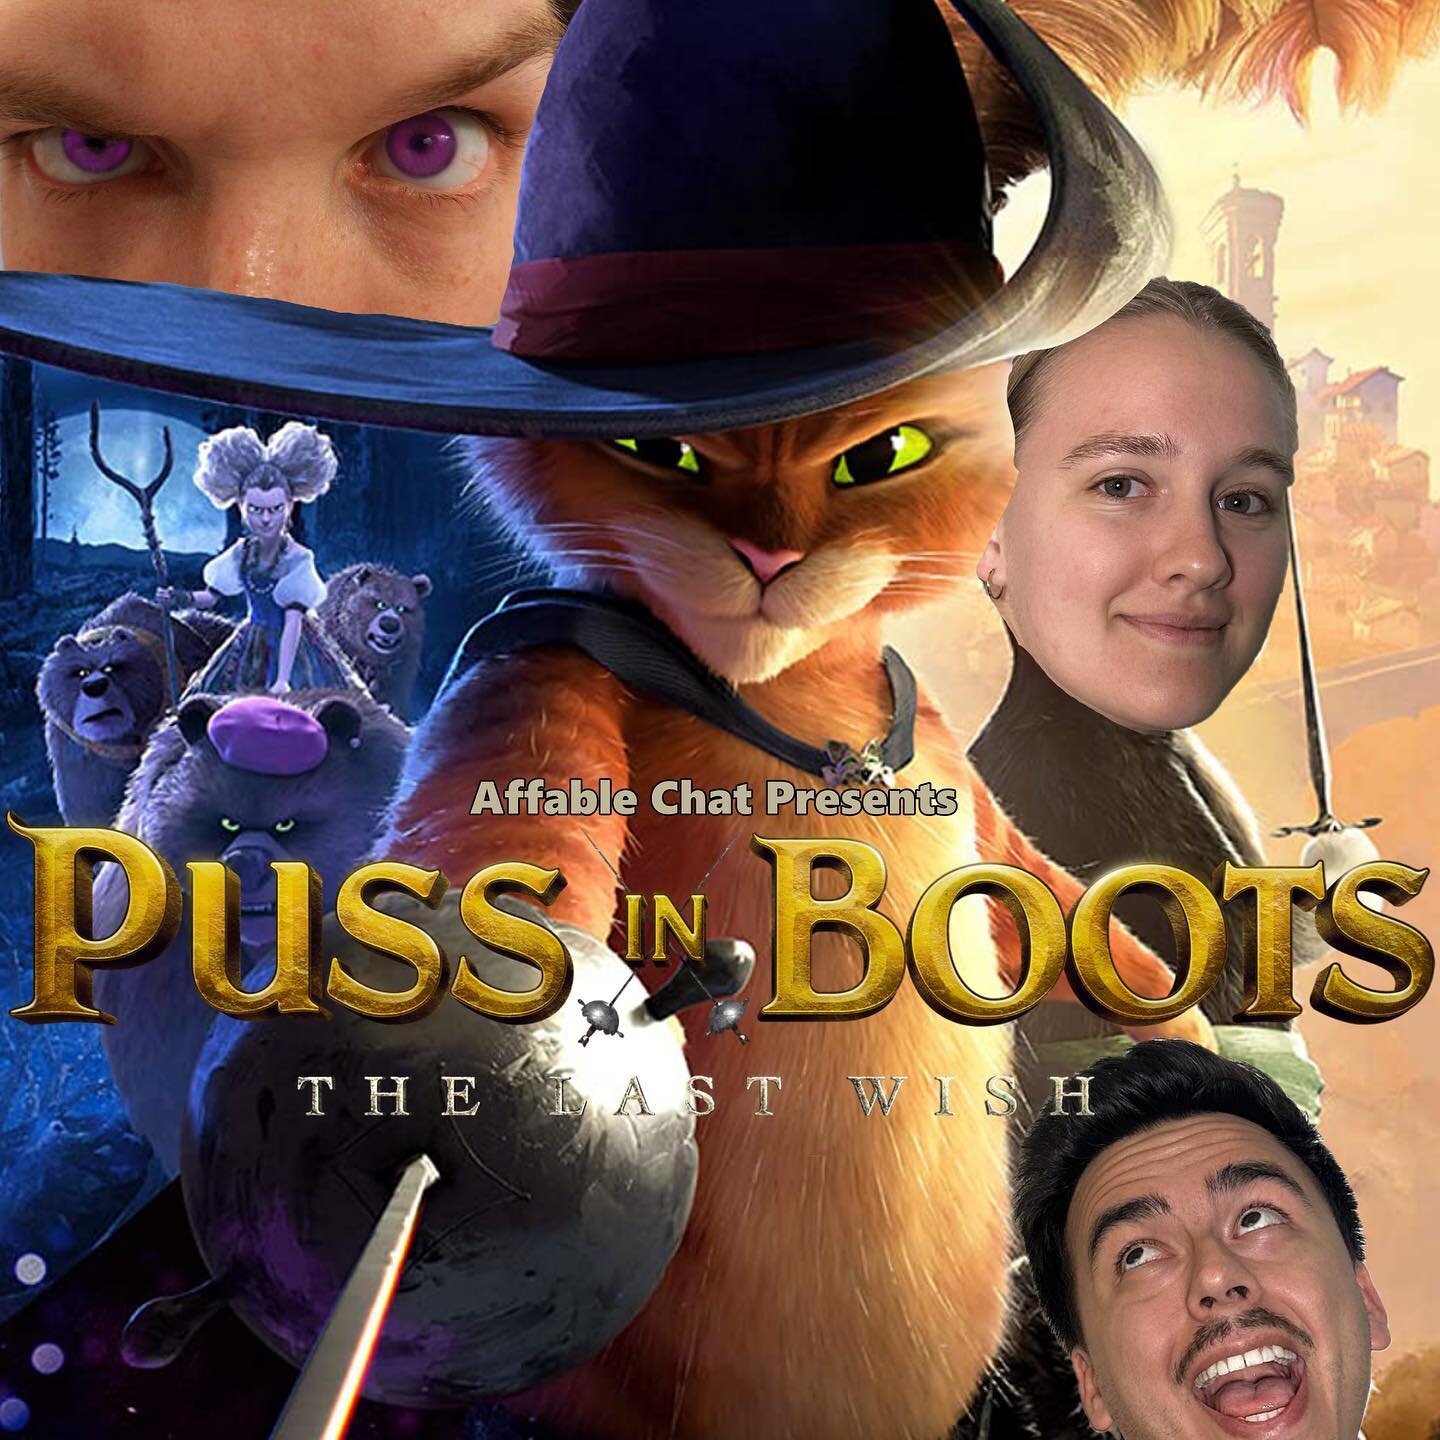 New episode featuring @lieselrutland out now! #pussinboots #pussinbootsthelastwish #shrek